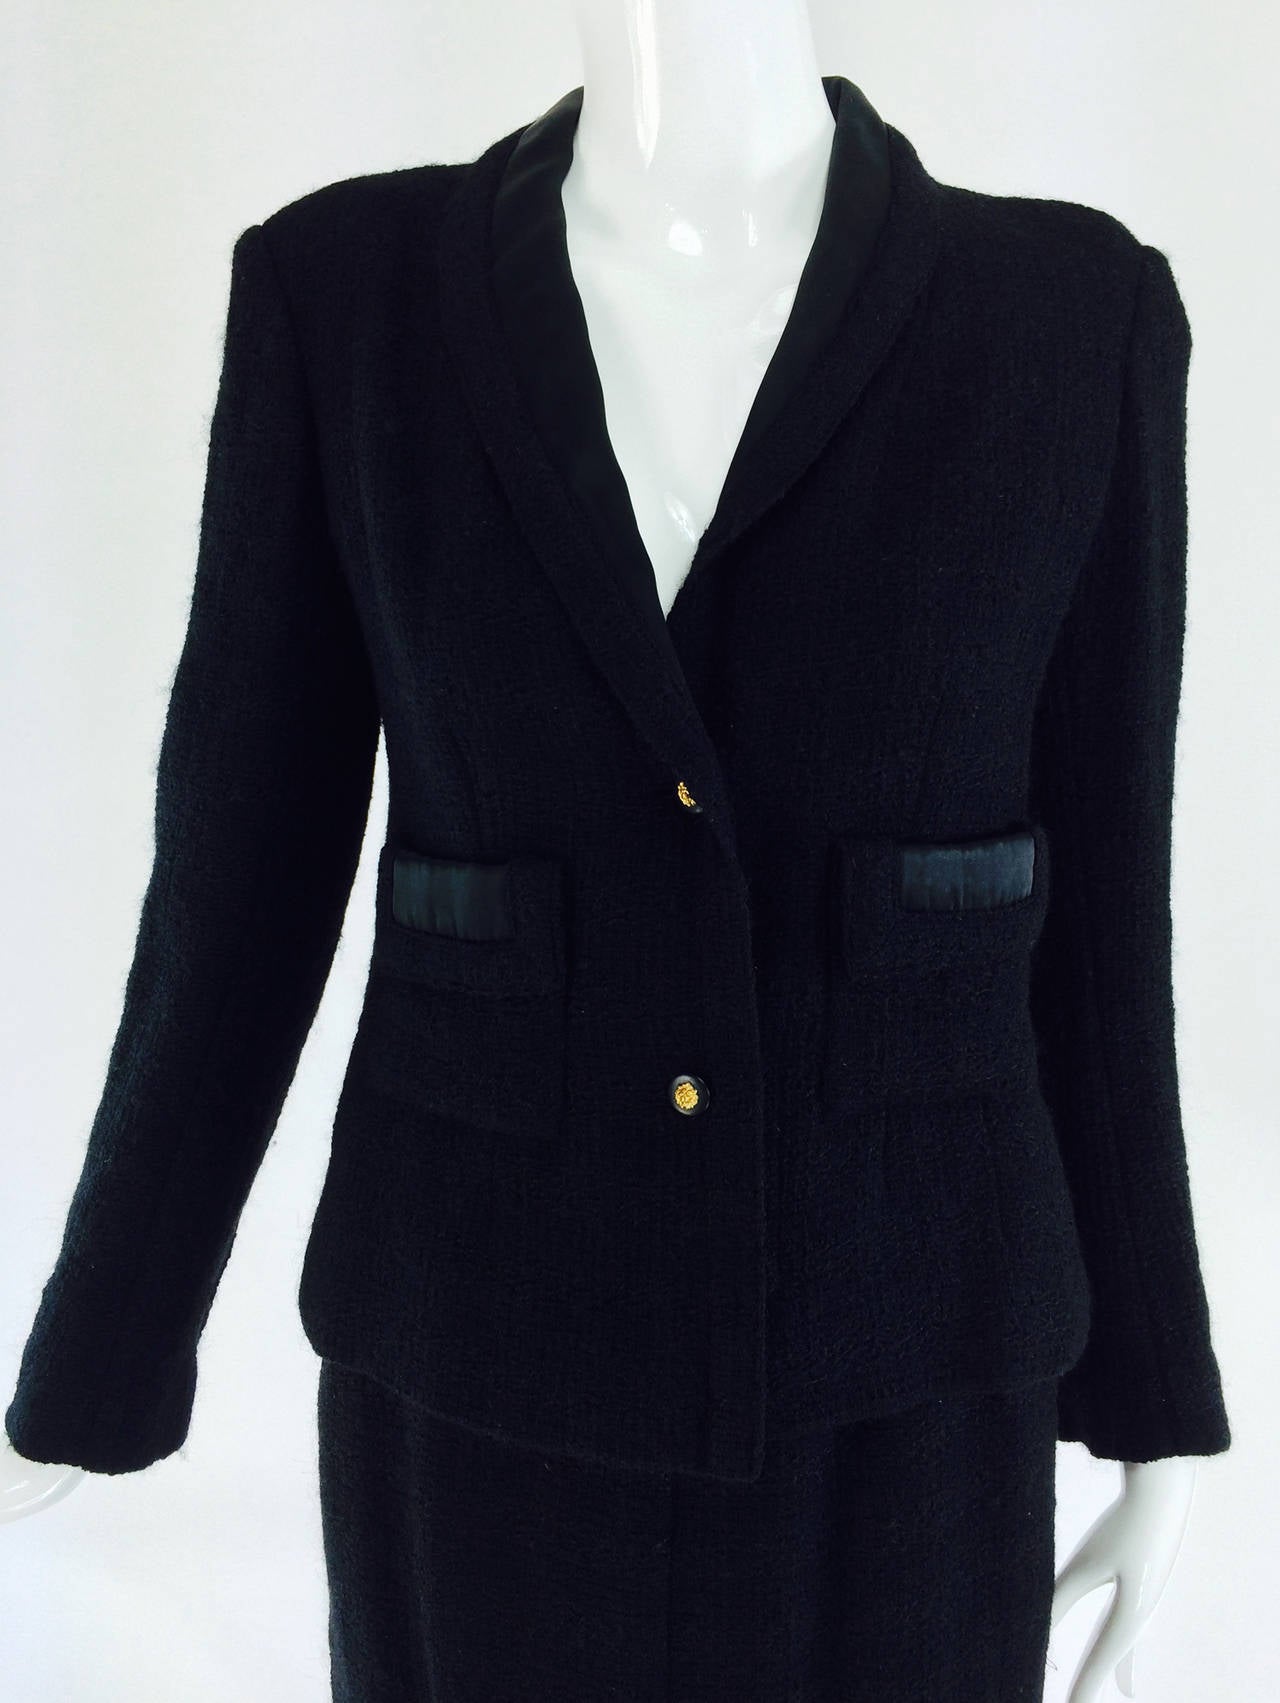 Chanel Creations-Paris black boucle wool suit Dated November 1, 1971. 'Chanel Creations', was the pret a porter/ready to wear label that was used until the Chanel Boutique label was introduced in 1983 when Karl Lagerfeld became creative director.